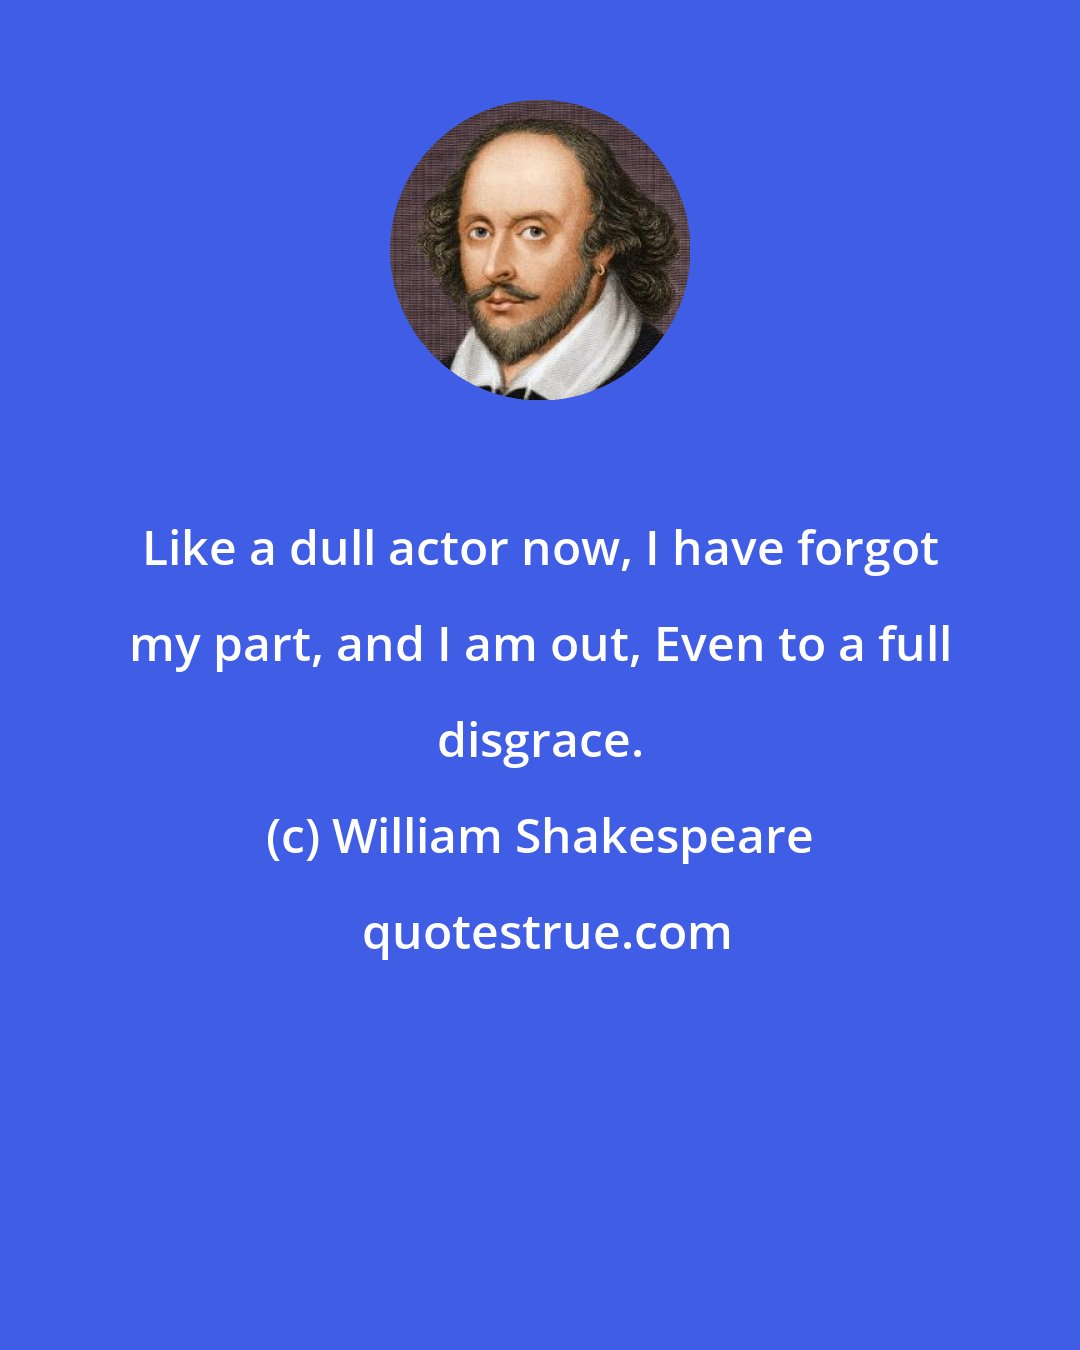 William Shakespeare: Like a dull actor now, I have forgot my part, and I am out, Even to a full disgrace.